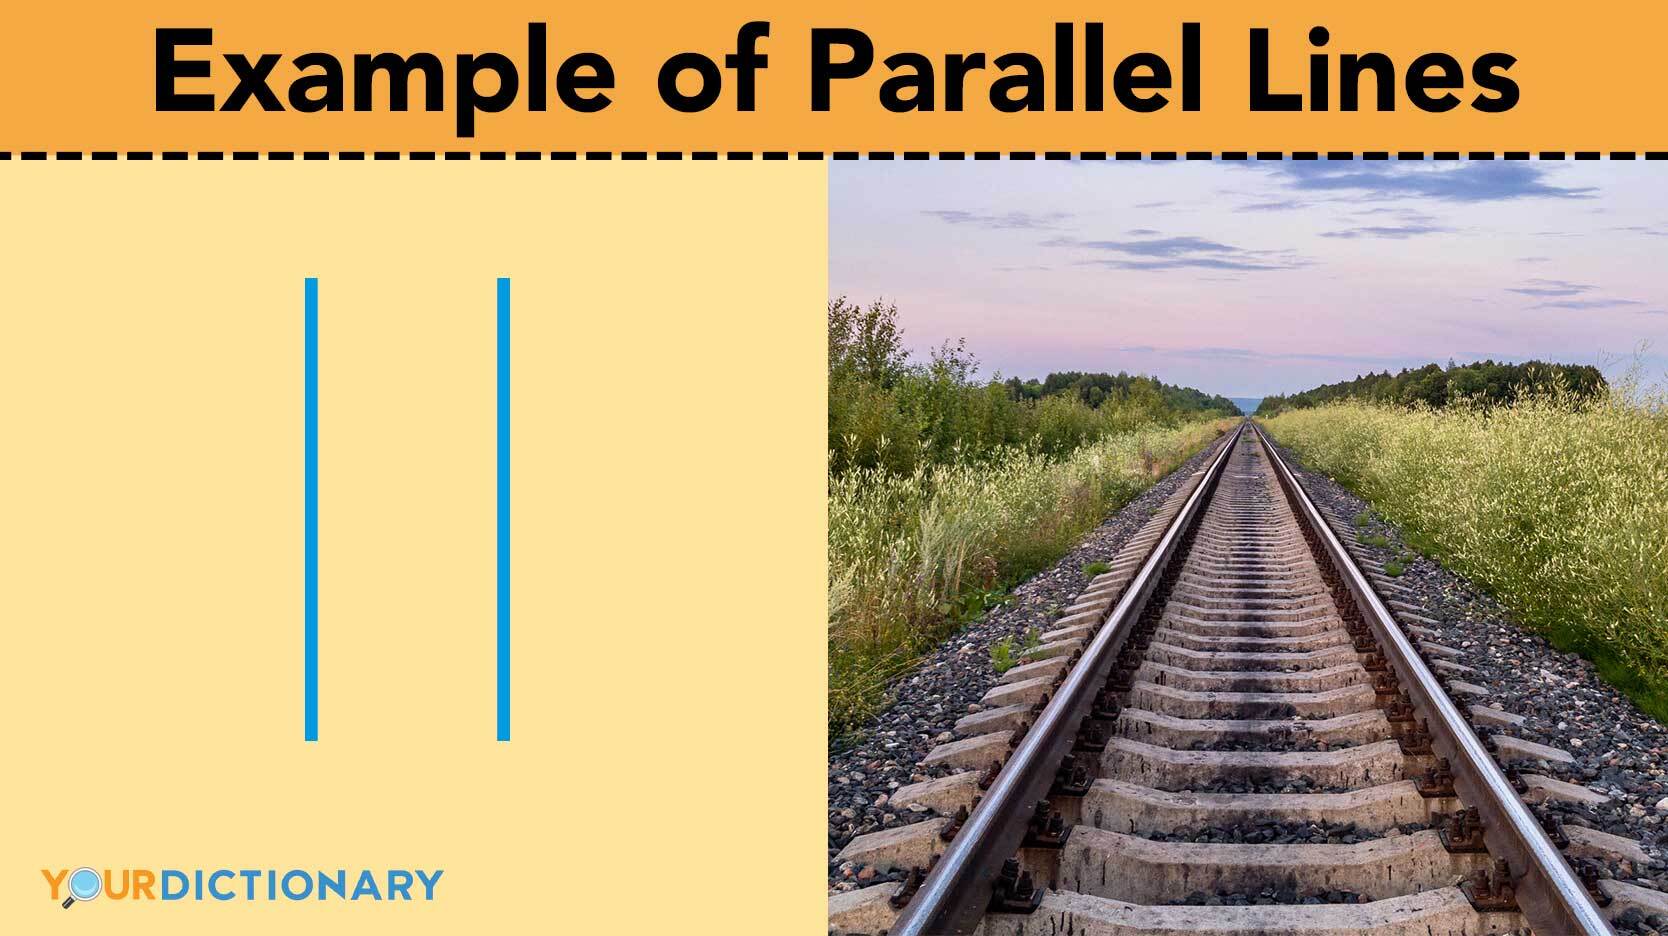 example of parallel lines railroad tracks